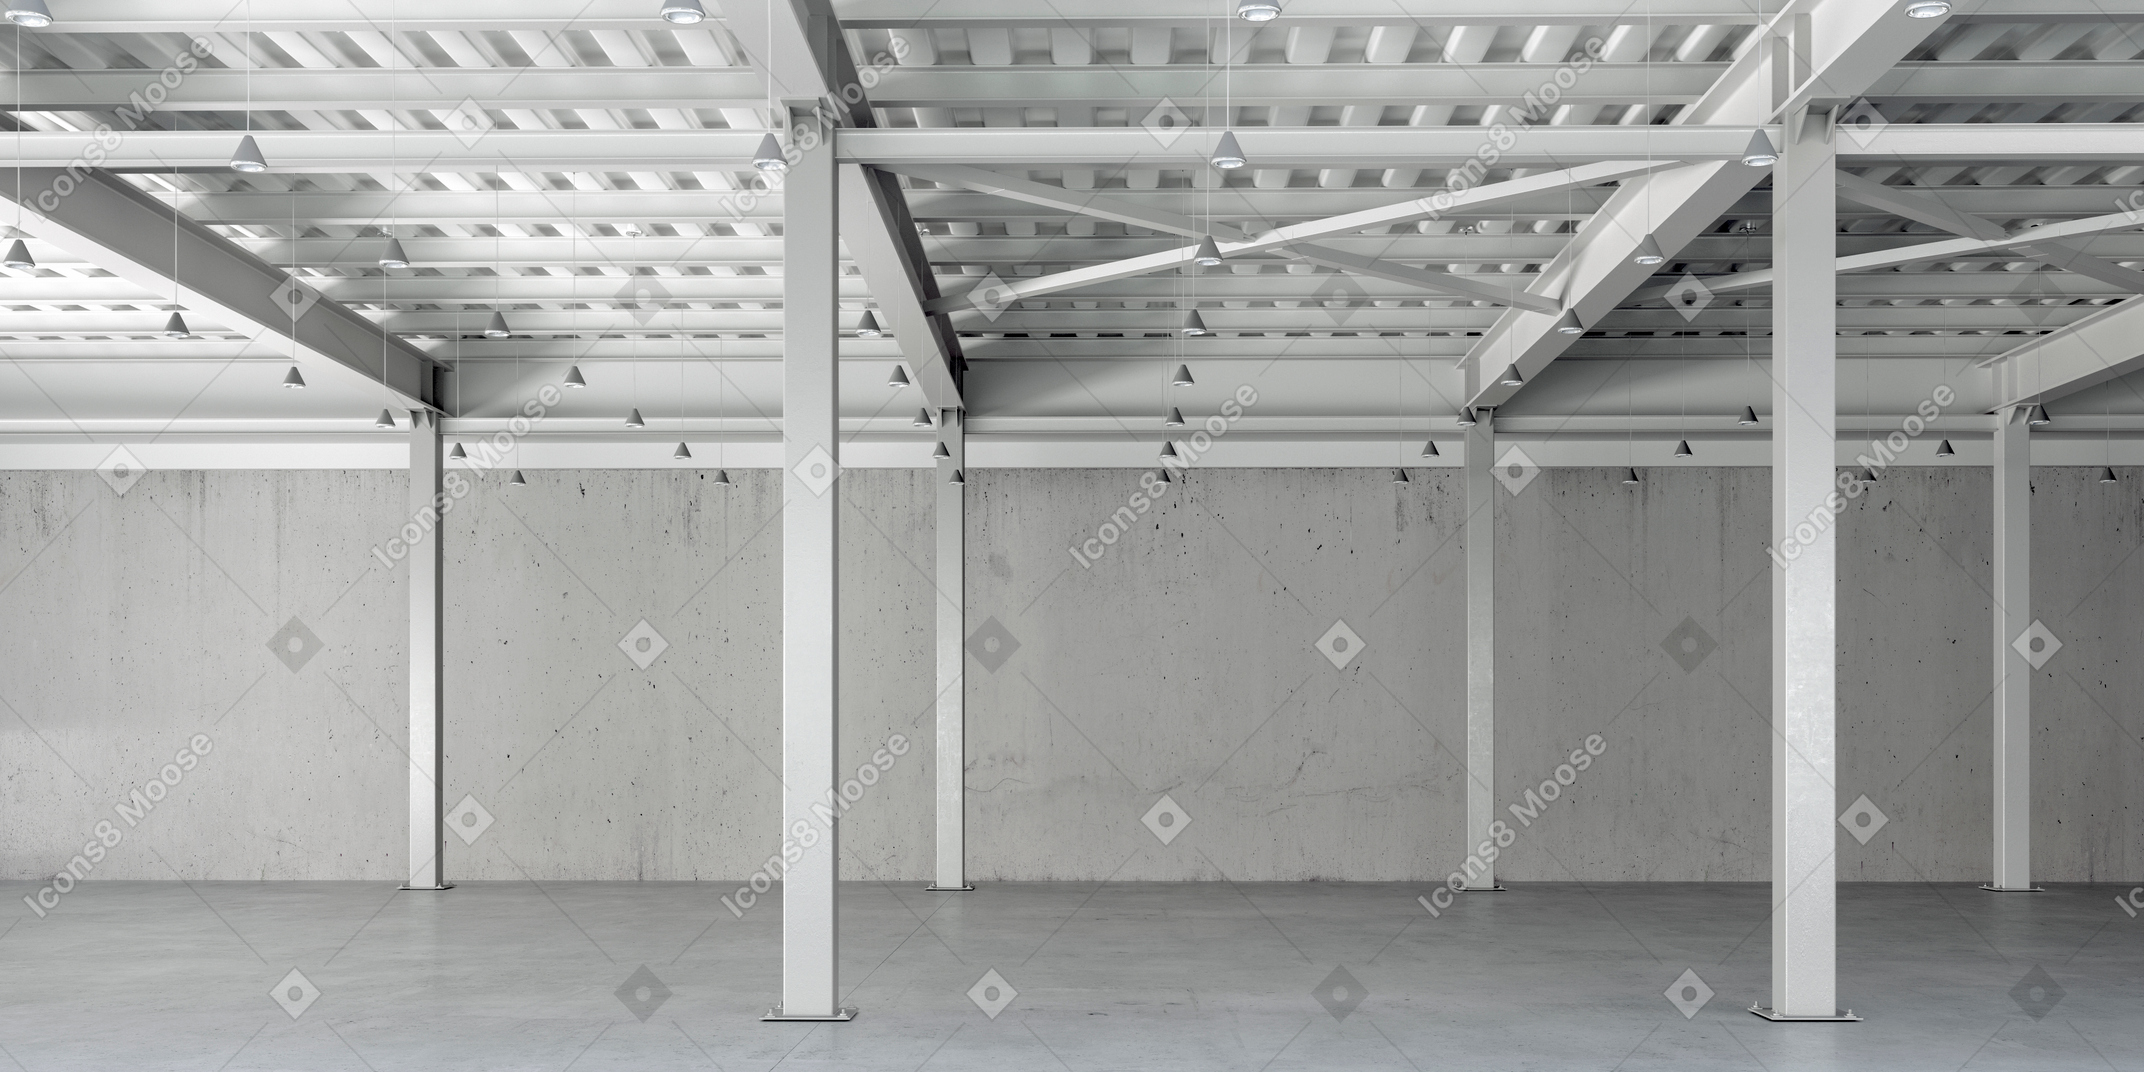 Empty warehouse with roof supported by pillars